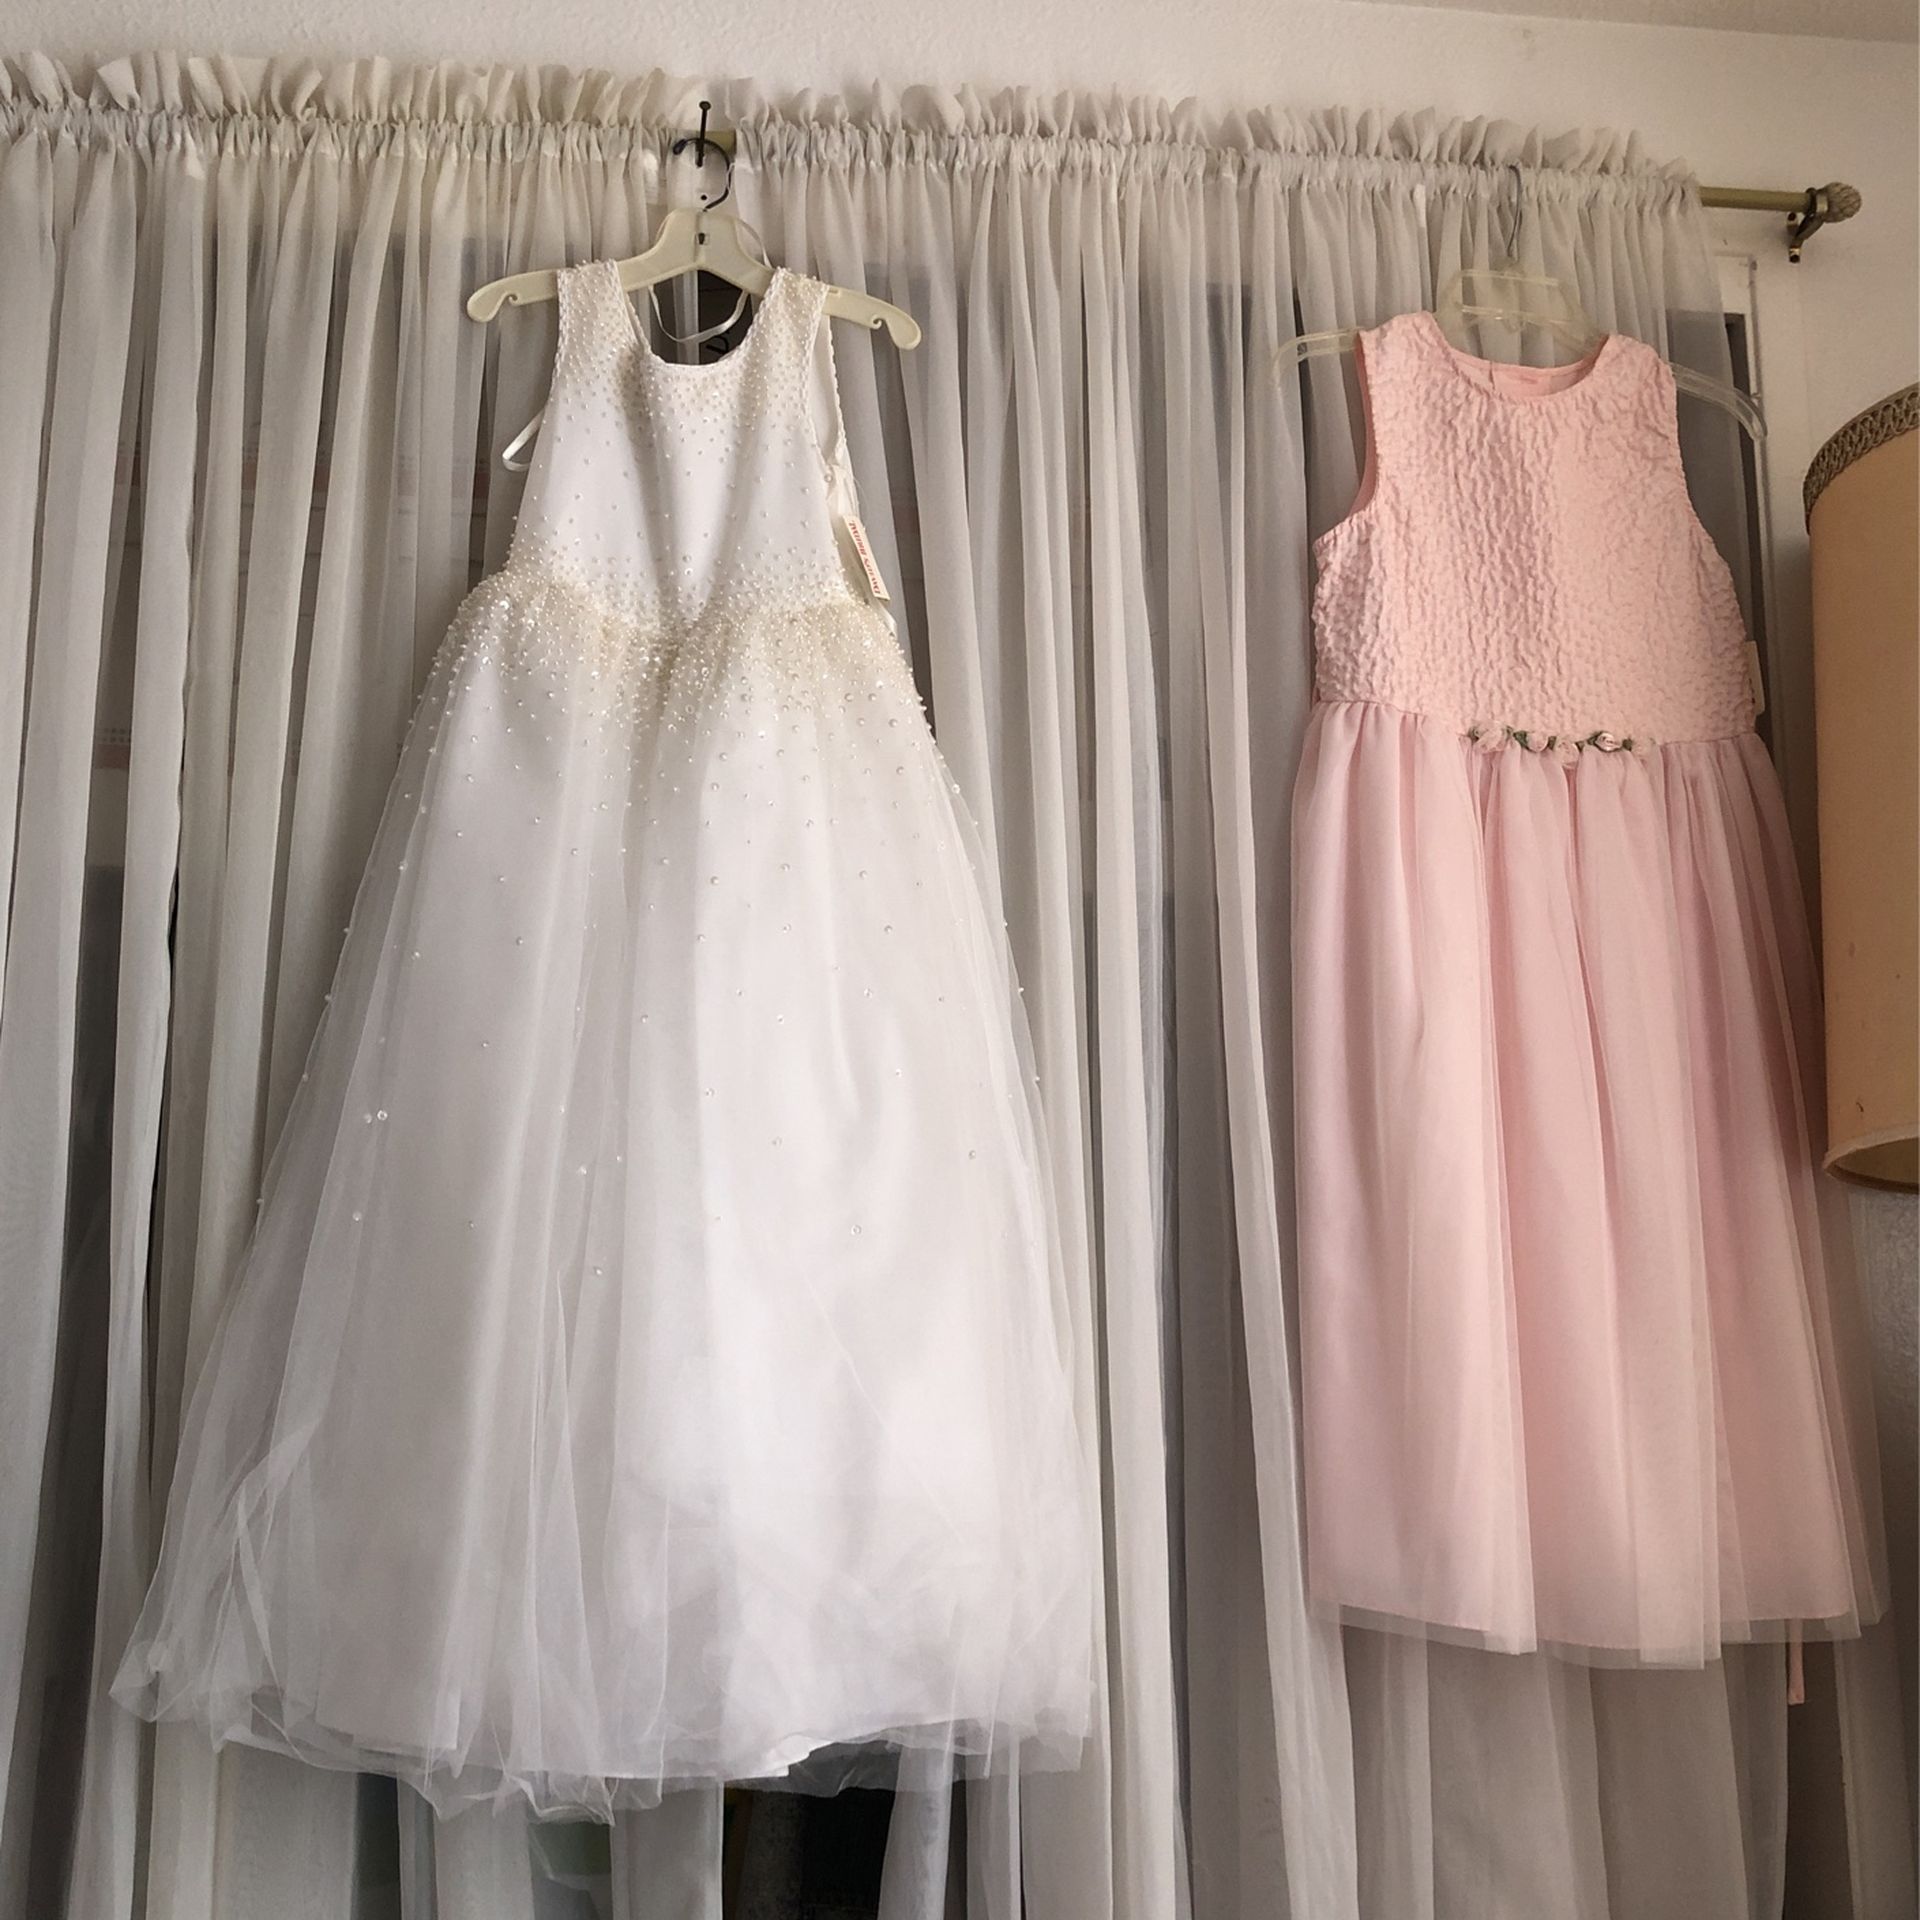 Dresses Children Size 8 And More-Formal Wear